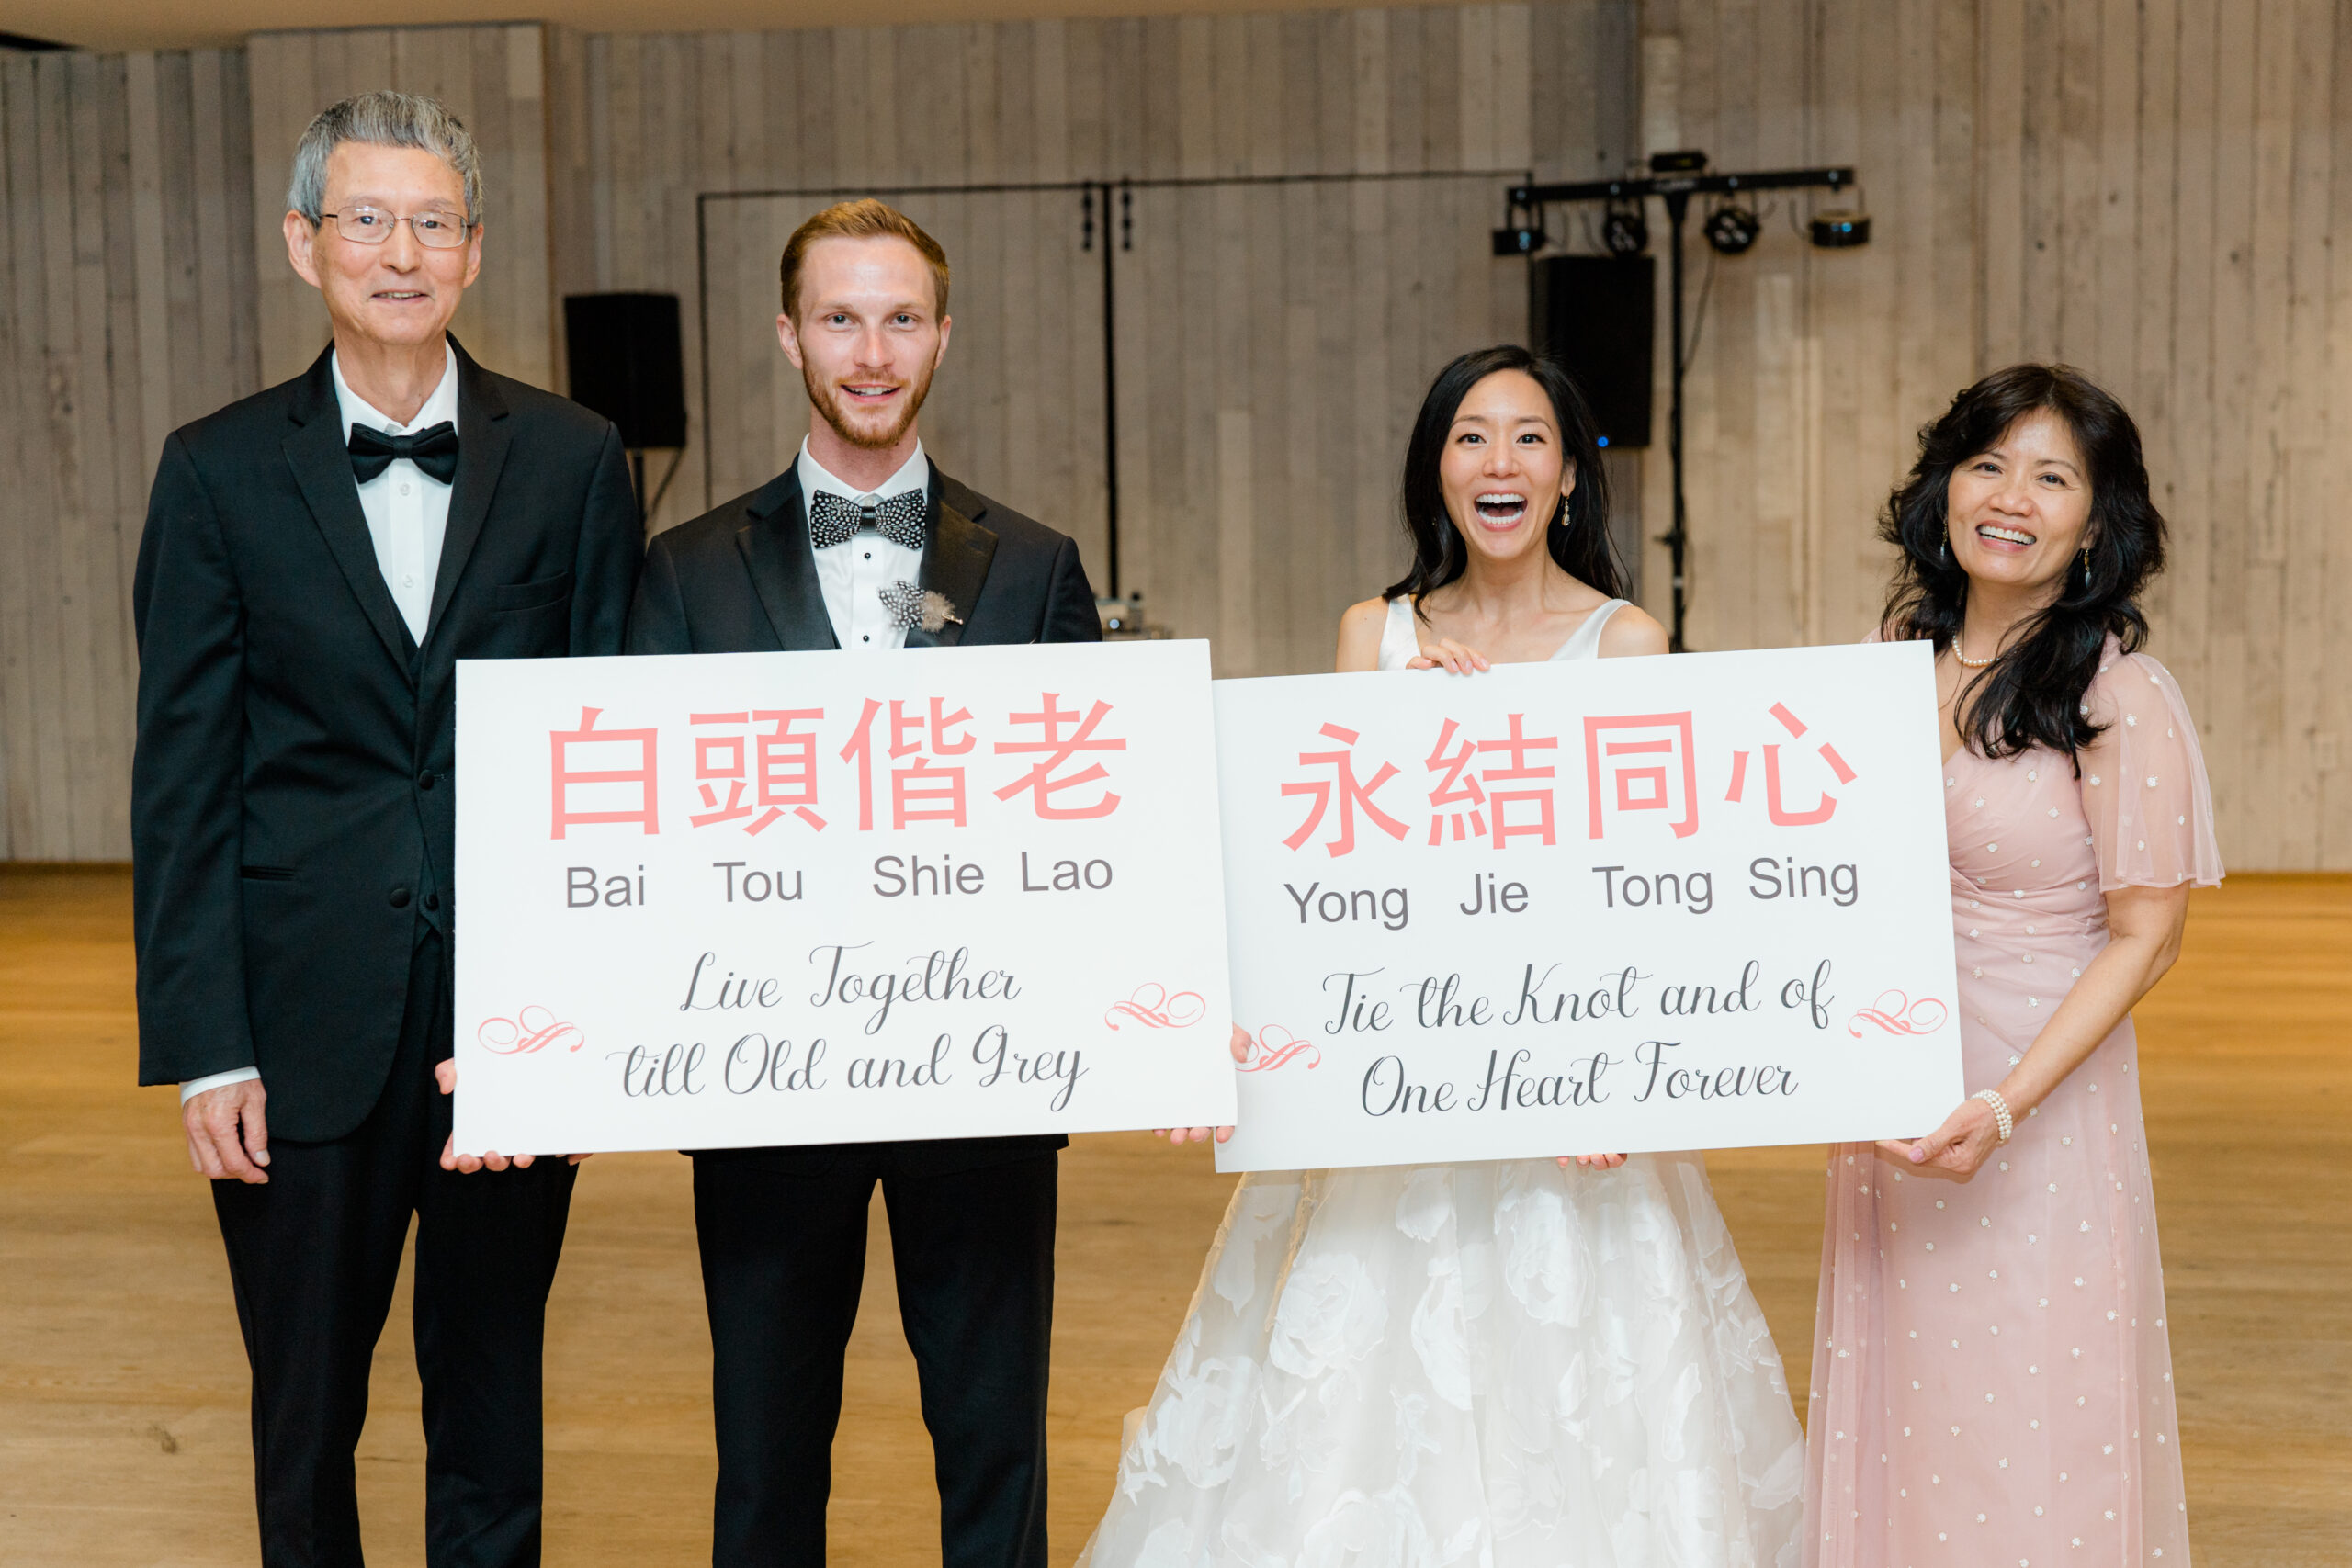 Father of the bride gives newlyweds traditional Chinese well wishes. 